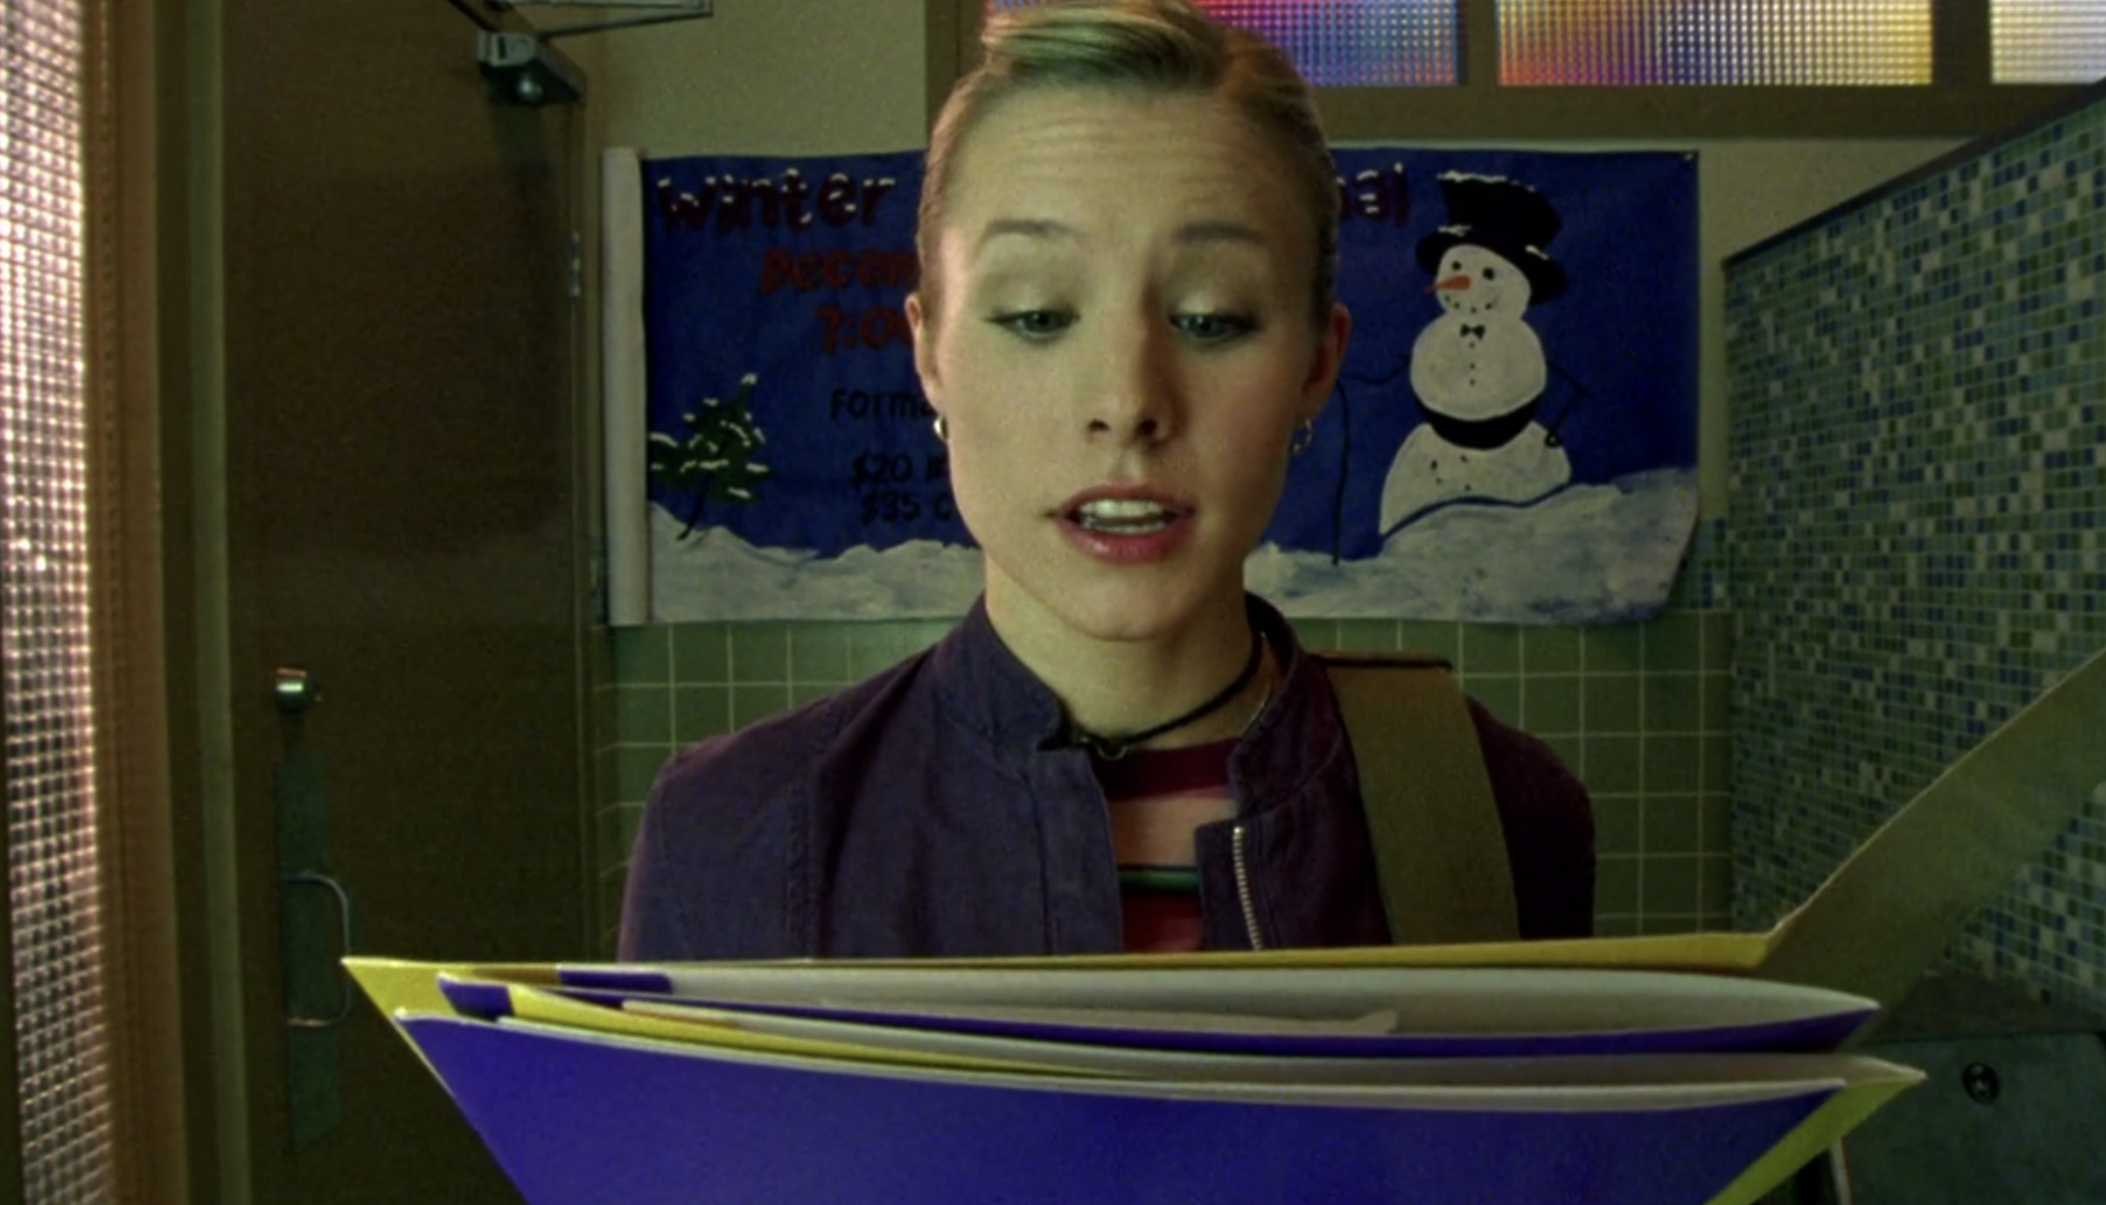 Screenshot of S1E11 of Veronica Mars. Veronica is standing in the bathroom at Neptune High and holding an open folder, looking at it and reading from it.